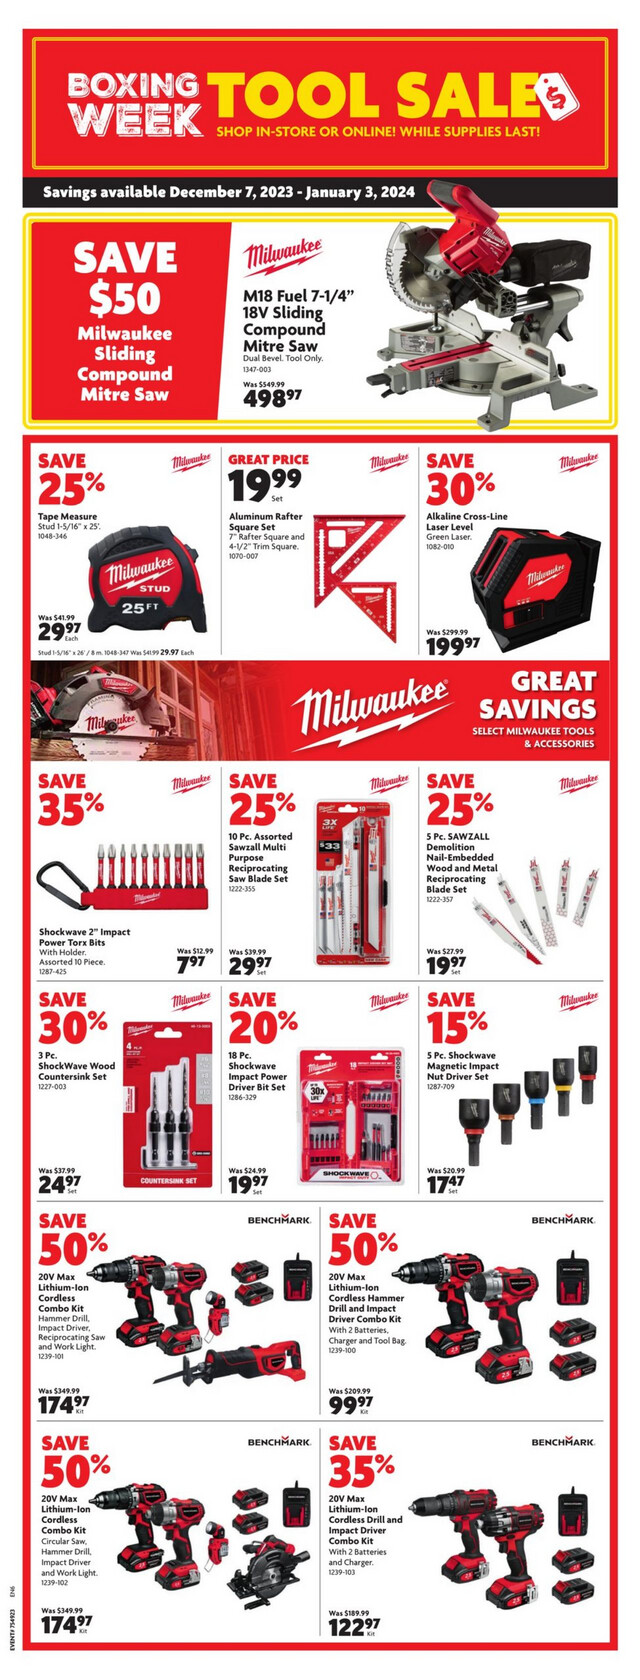 Home Hardware Flyer from 12/07/2023